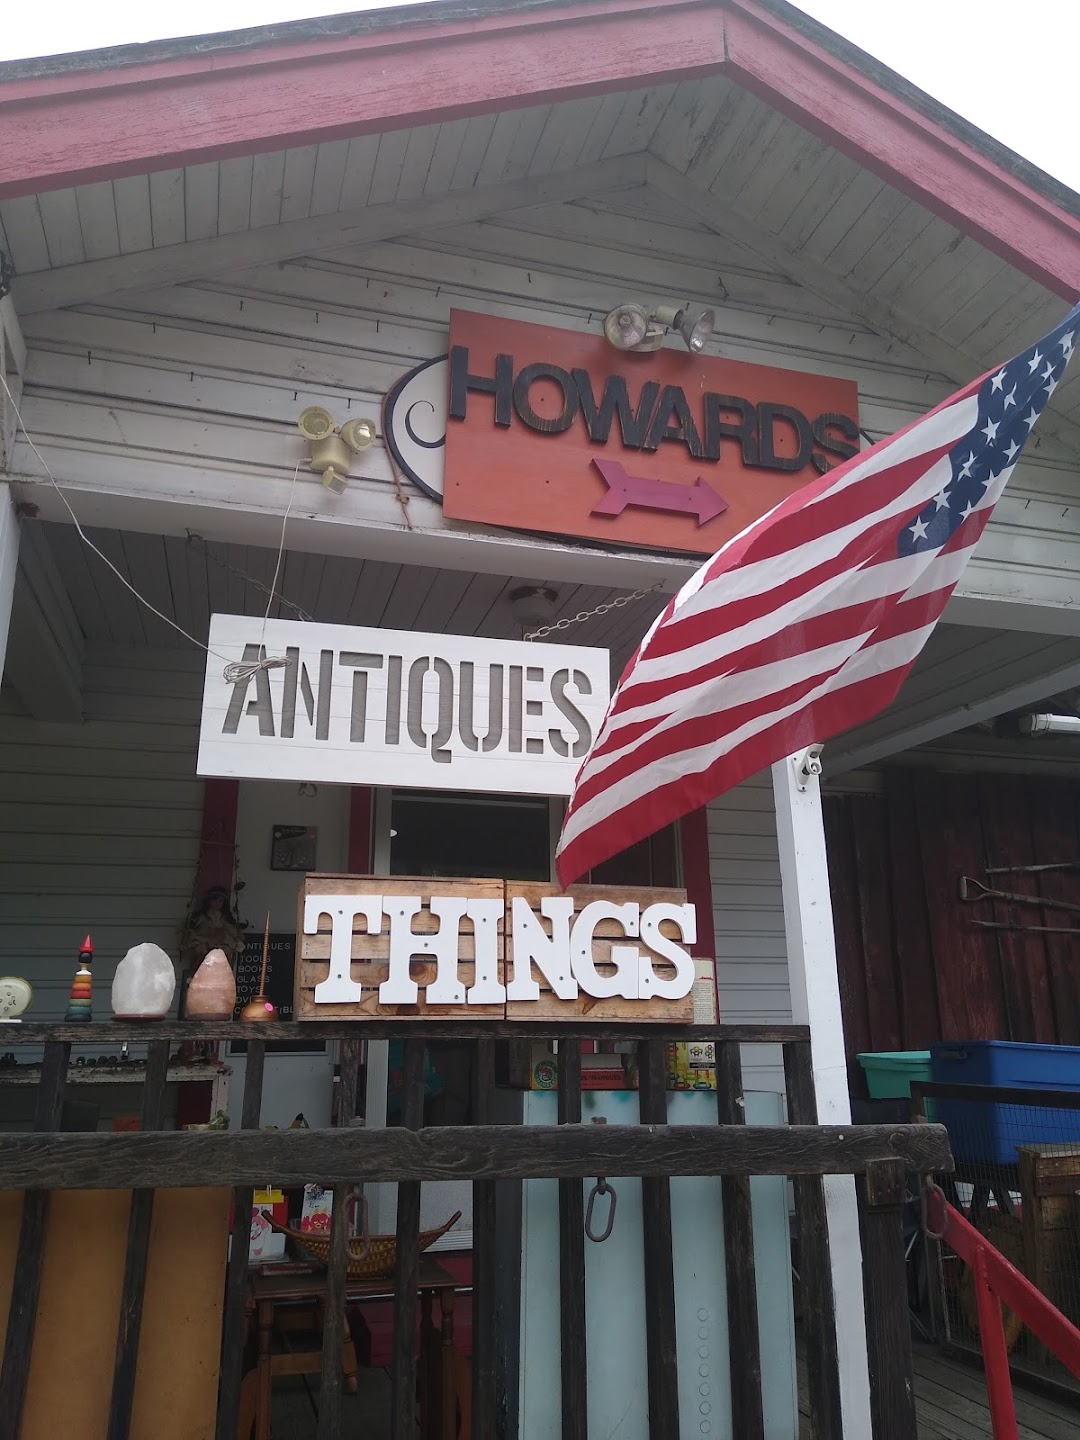 Howards Antiques & Things